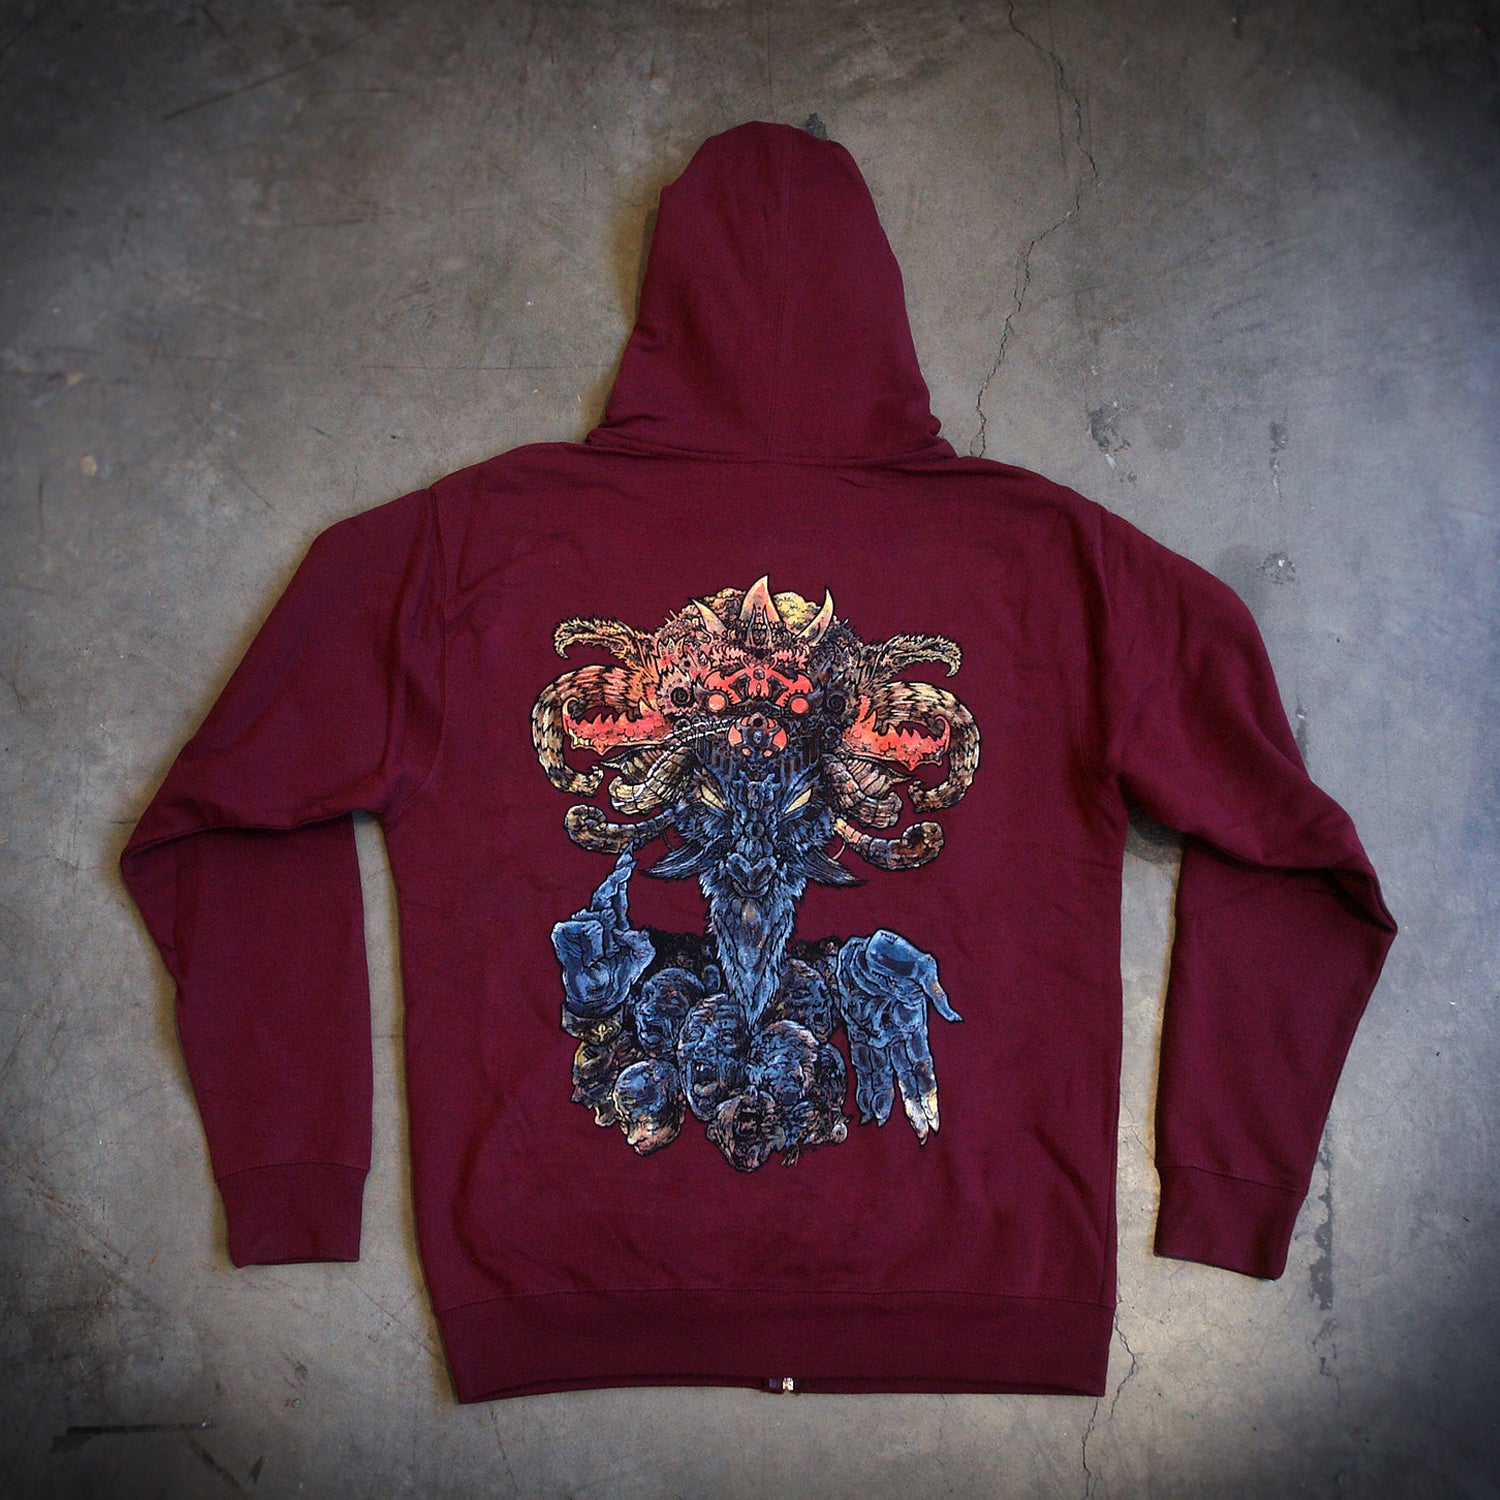 image of the back of a maroon hoodie laid flat on a concrete floor. the hoodie has a full back print of a goat like god figure